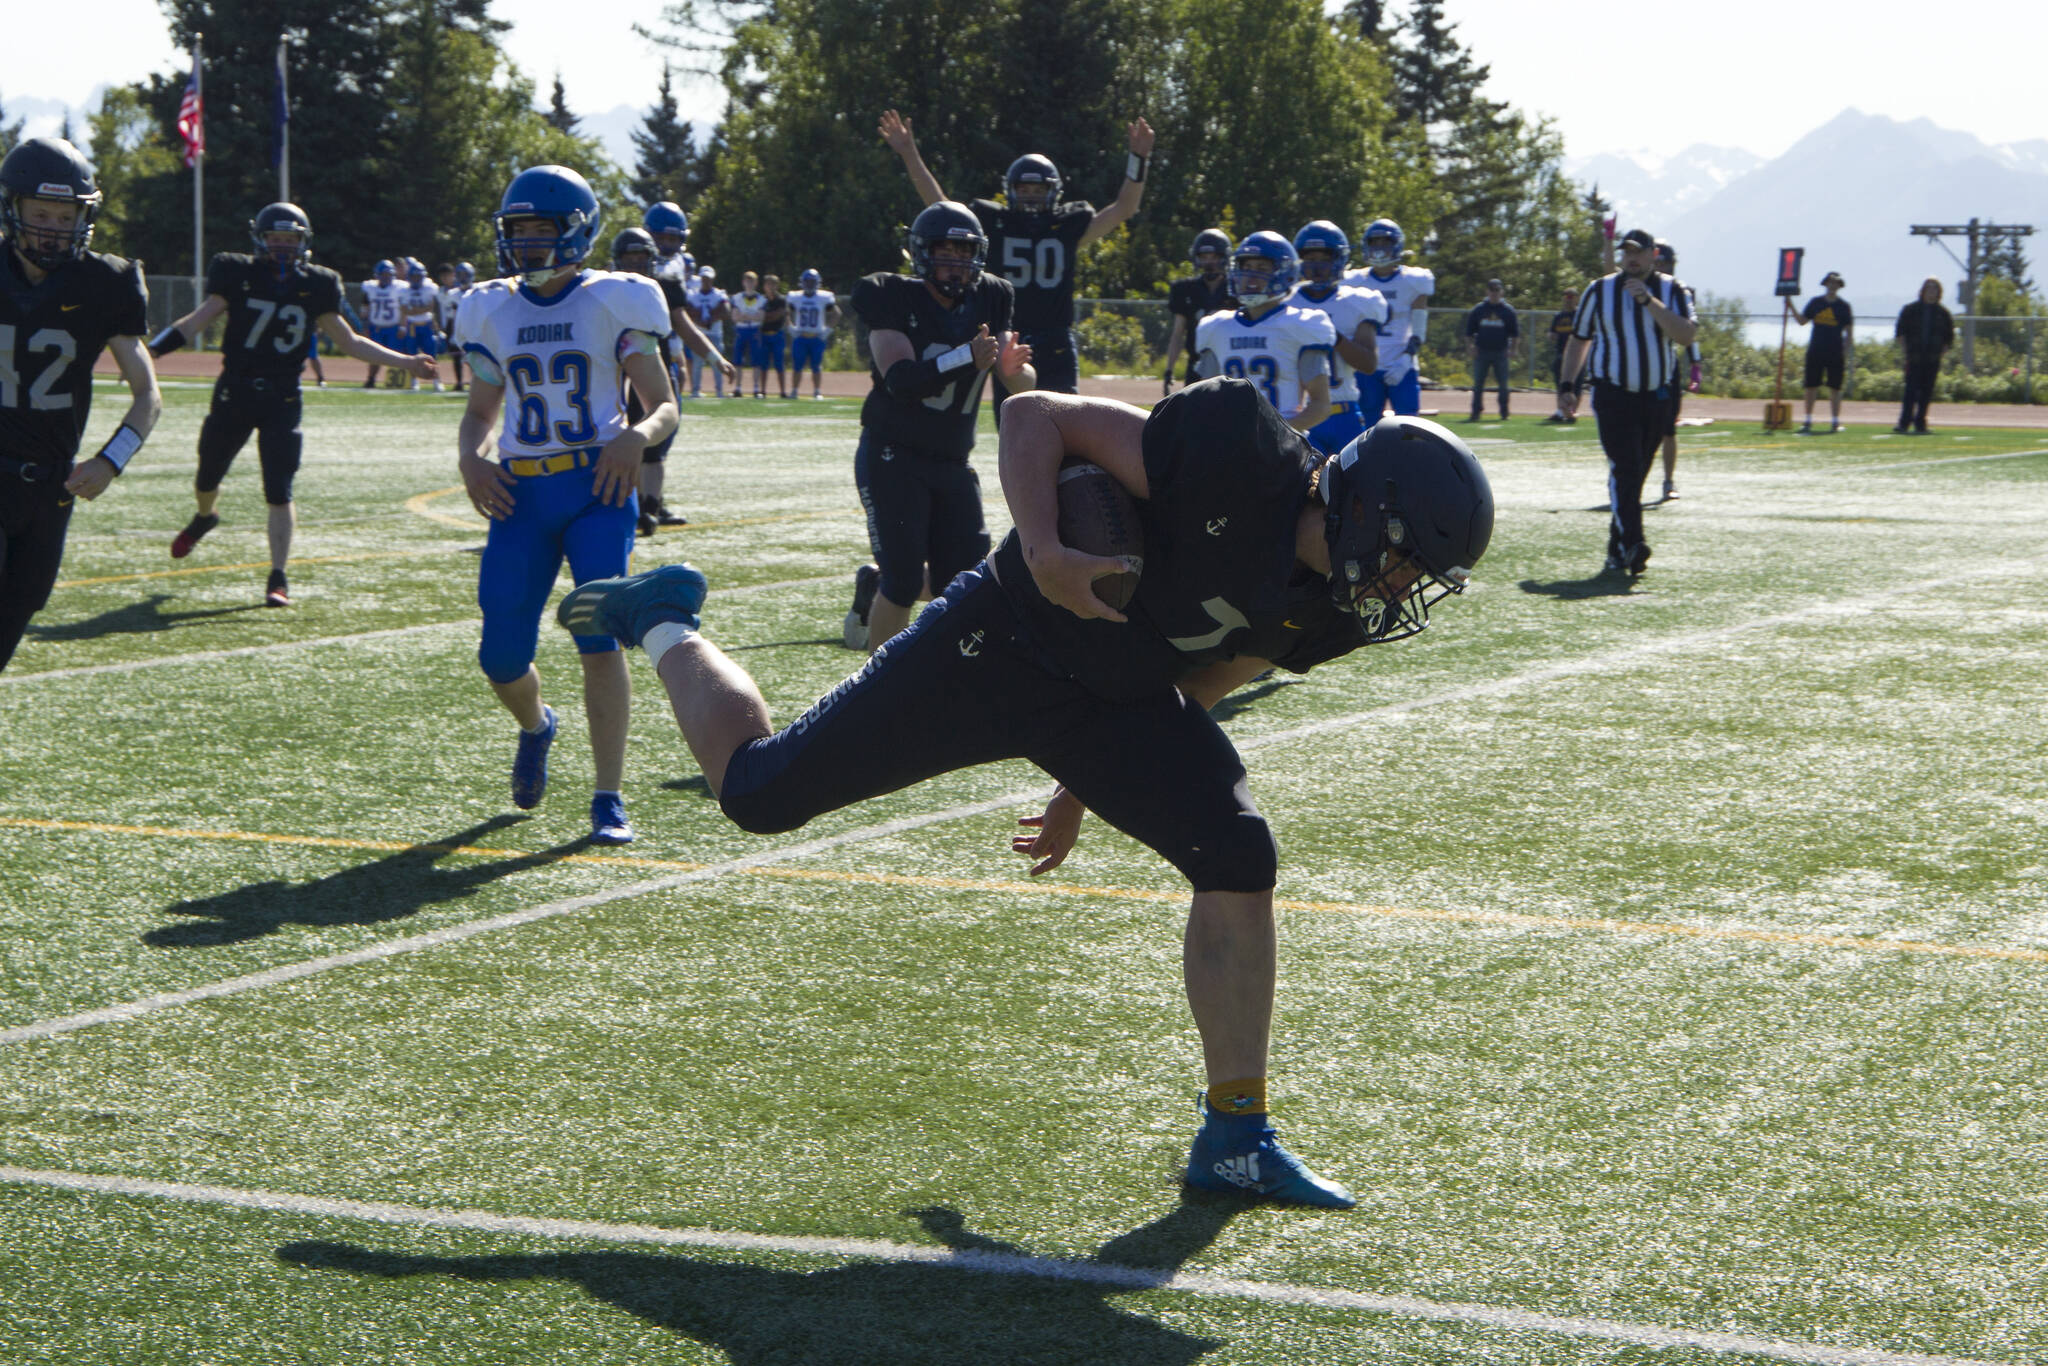 Carter Tennison scores a touchdown for the Homer Mariners against Kodiak High School on Saturday, Aug.28. The Mariners won 34-0. (Photo by Sarah Knapp/Homer News)